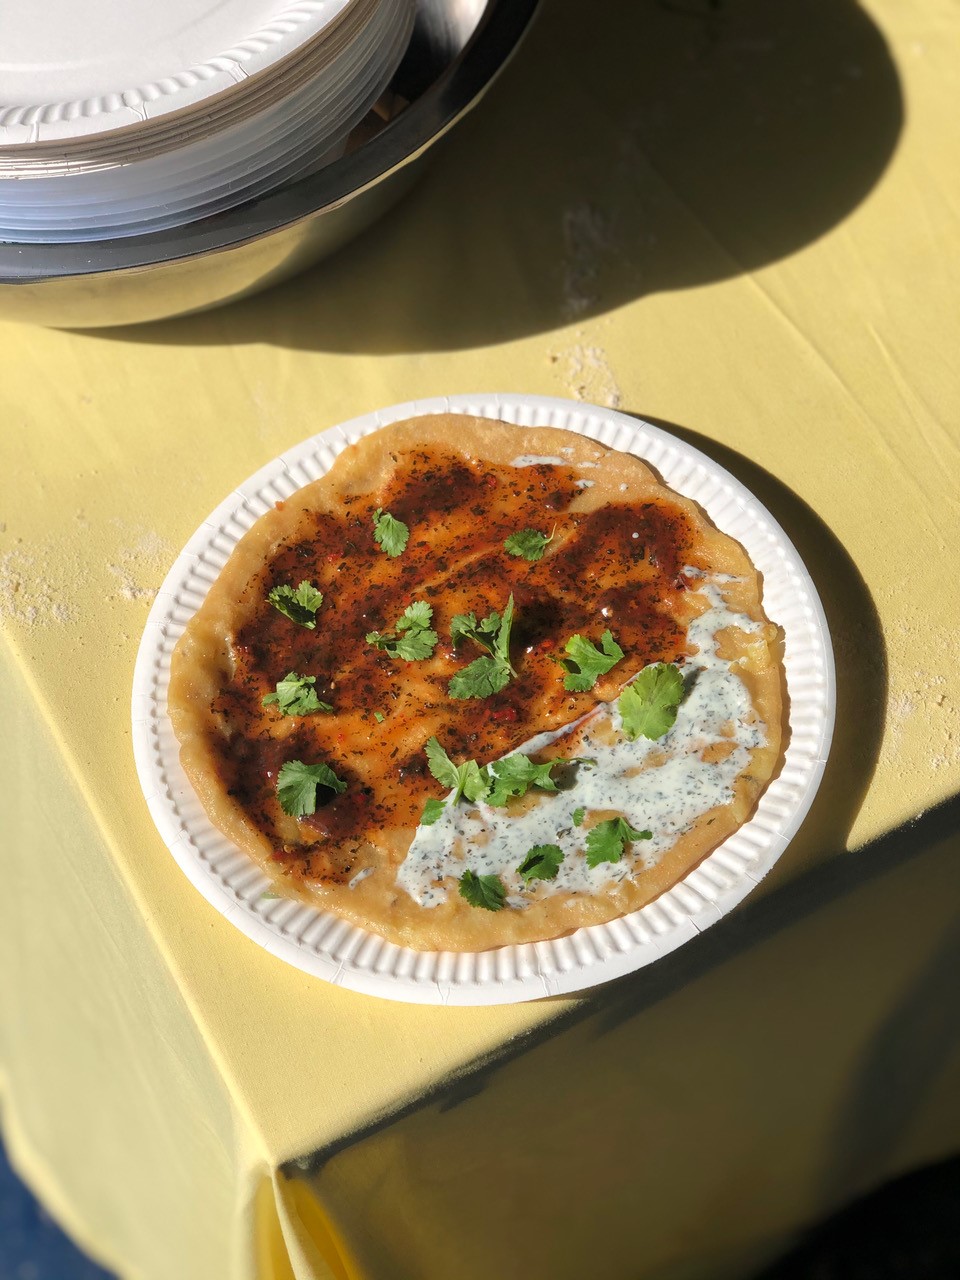 Picture shows a paper plate with a traditional Punjabi potato flatbread coated in sauces and corriander plated on a table 